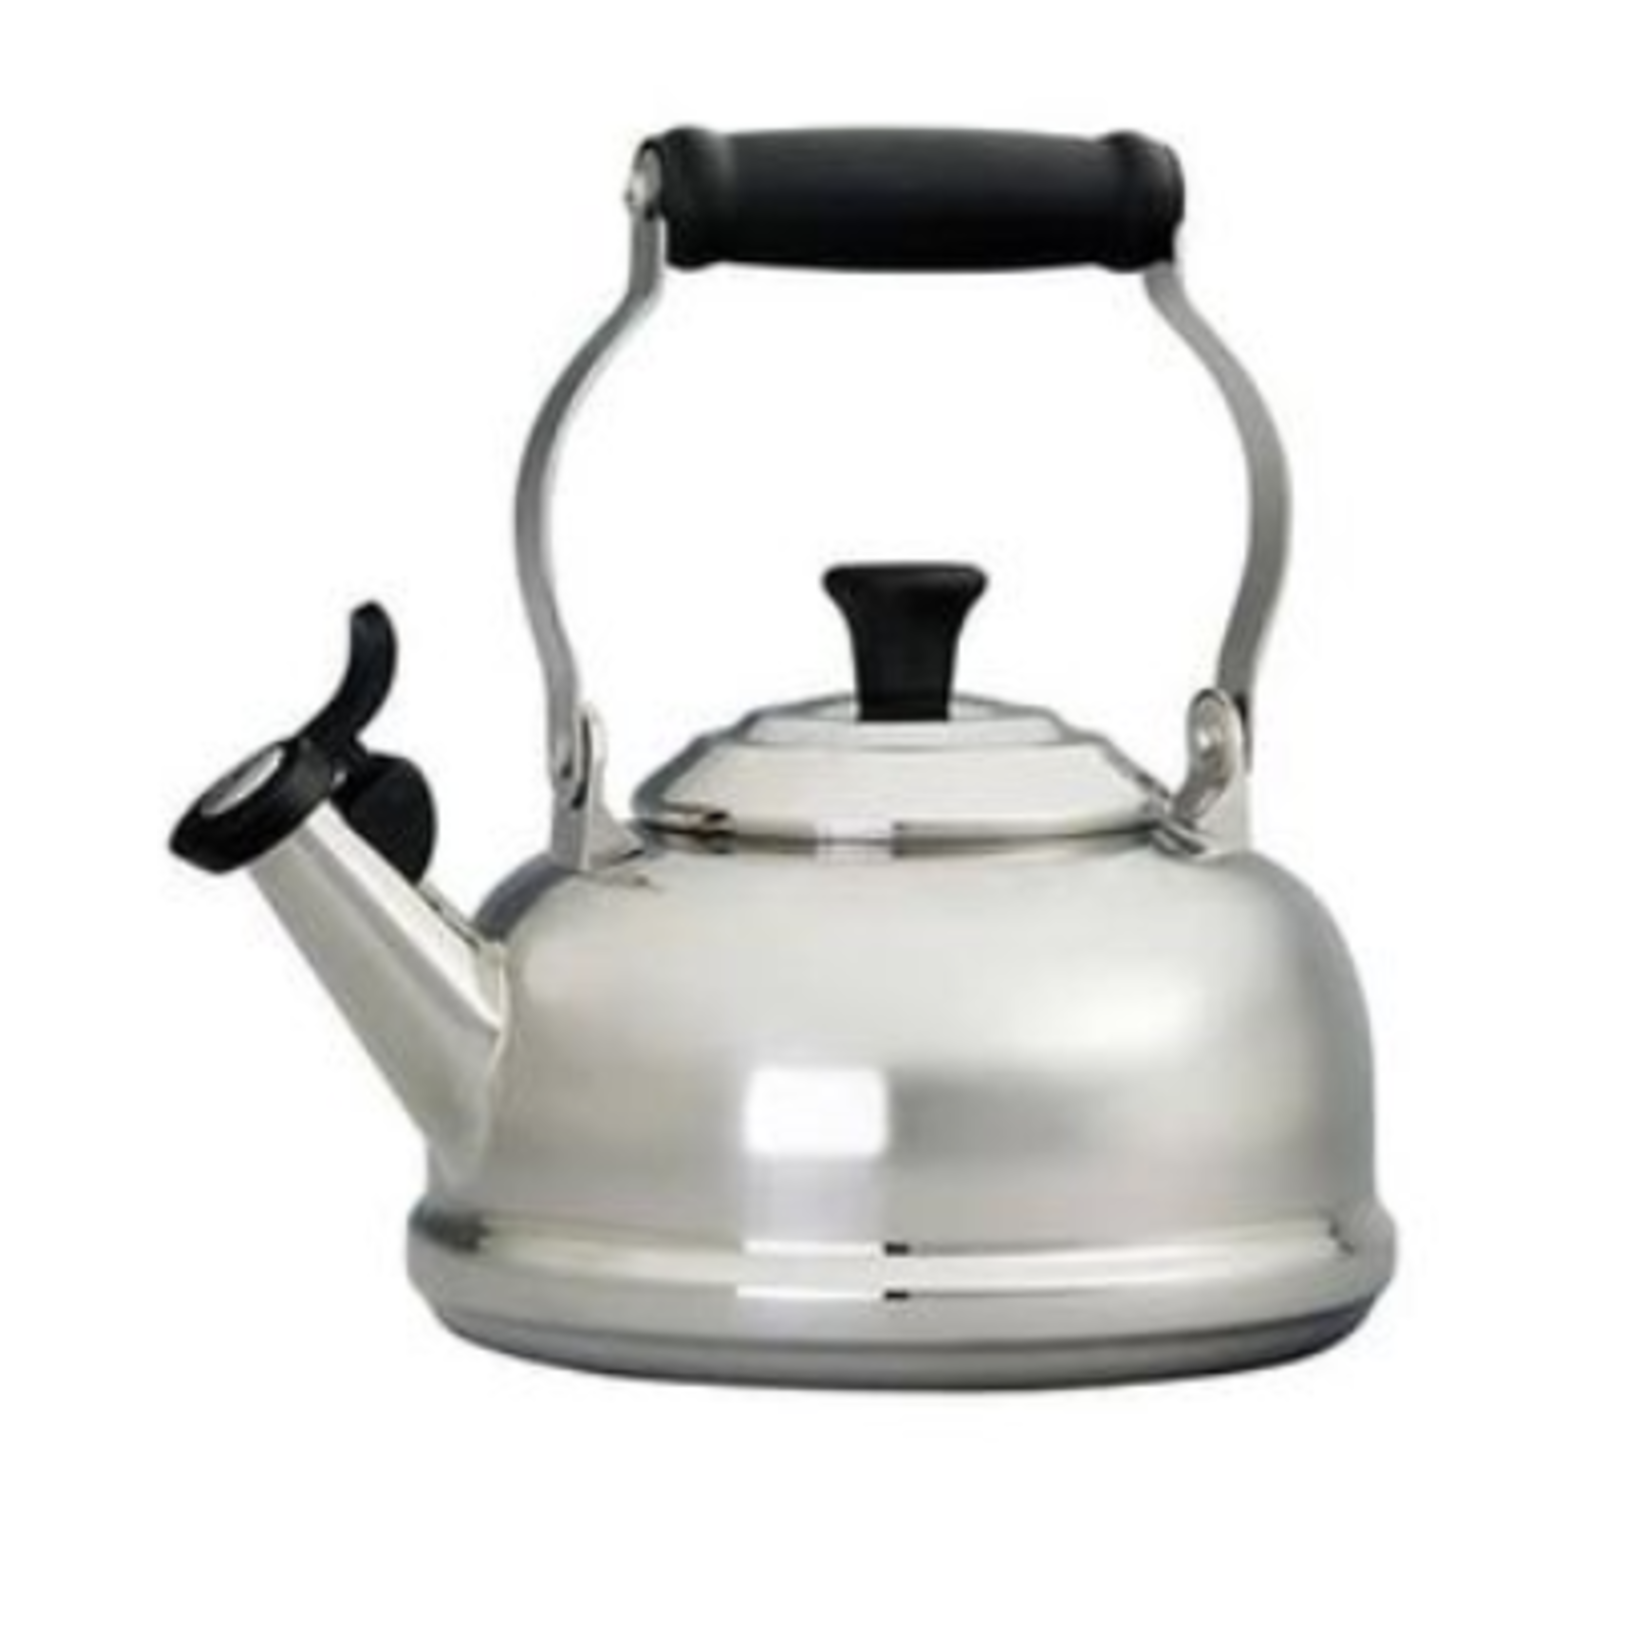 LE CREUSET LE CREUSET Classic Whistling Kettle- Stainless